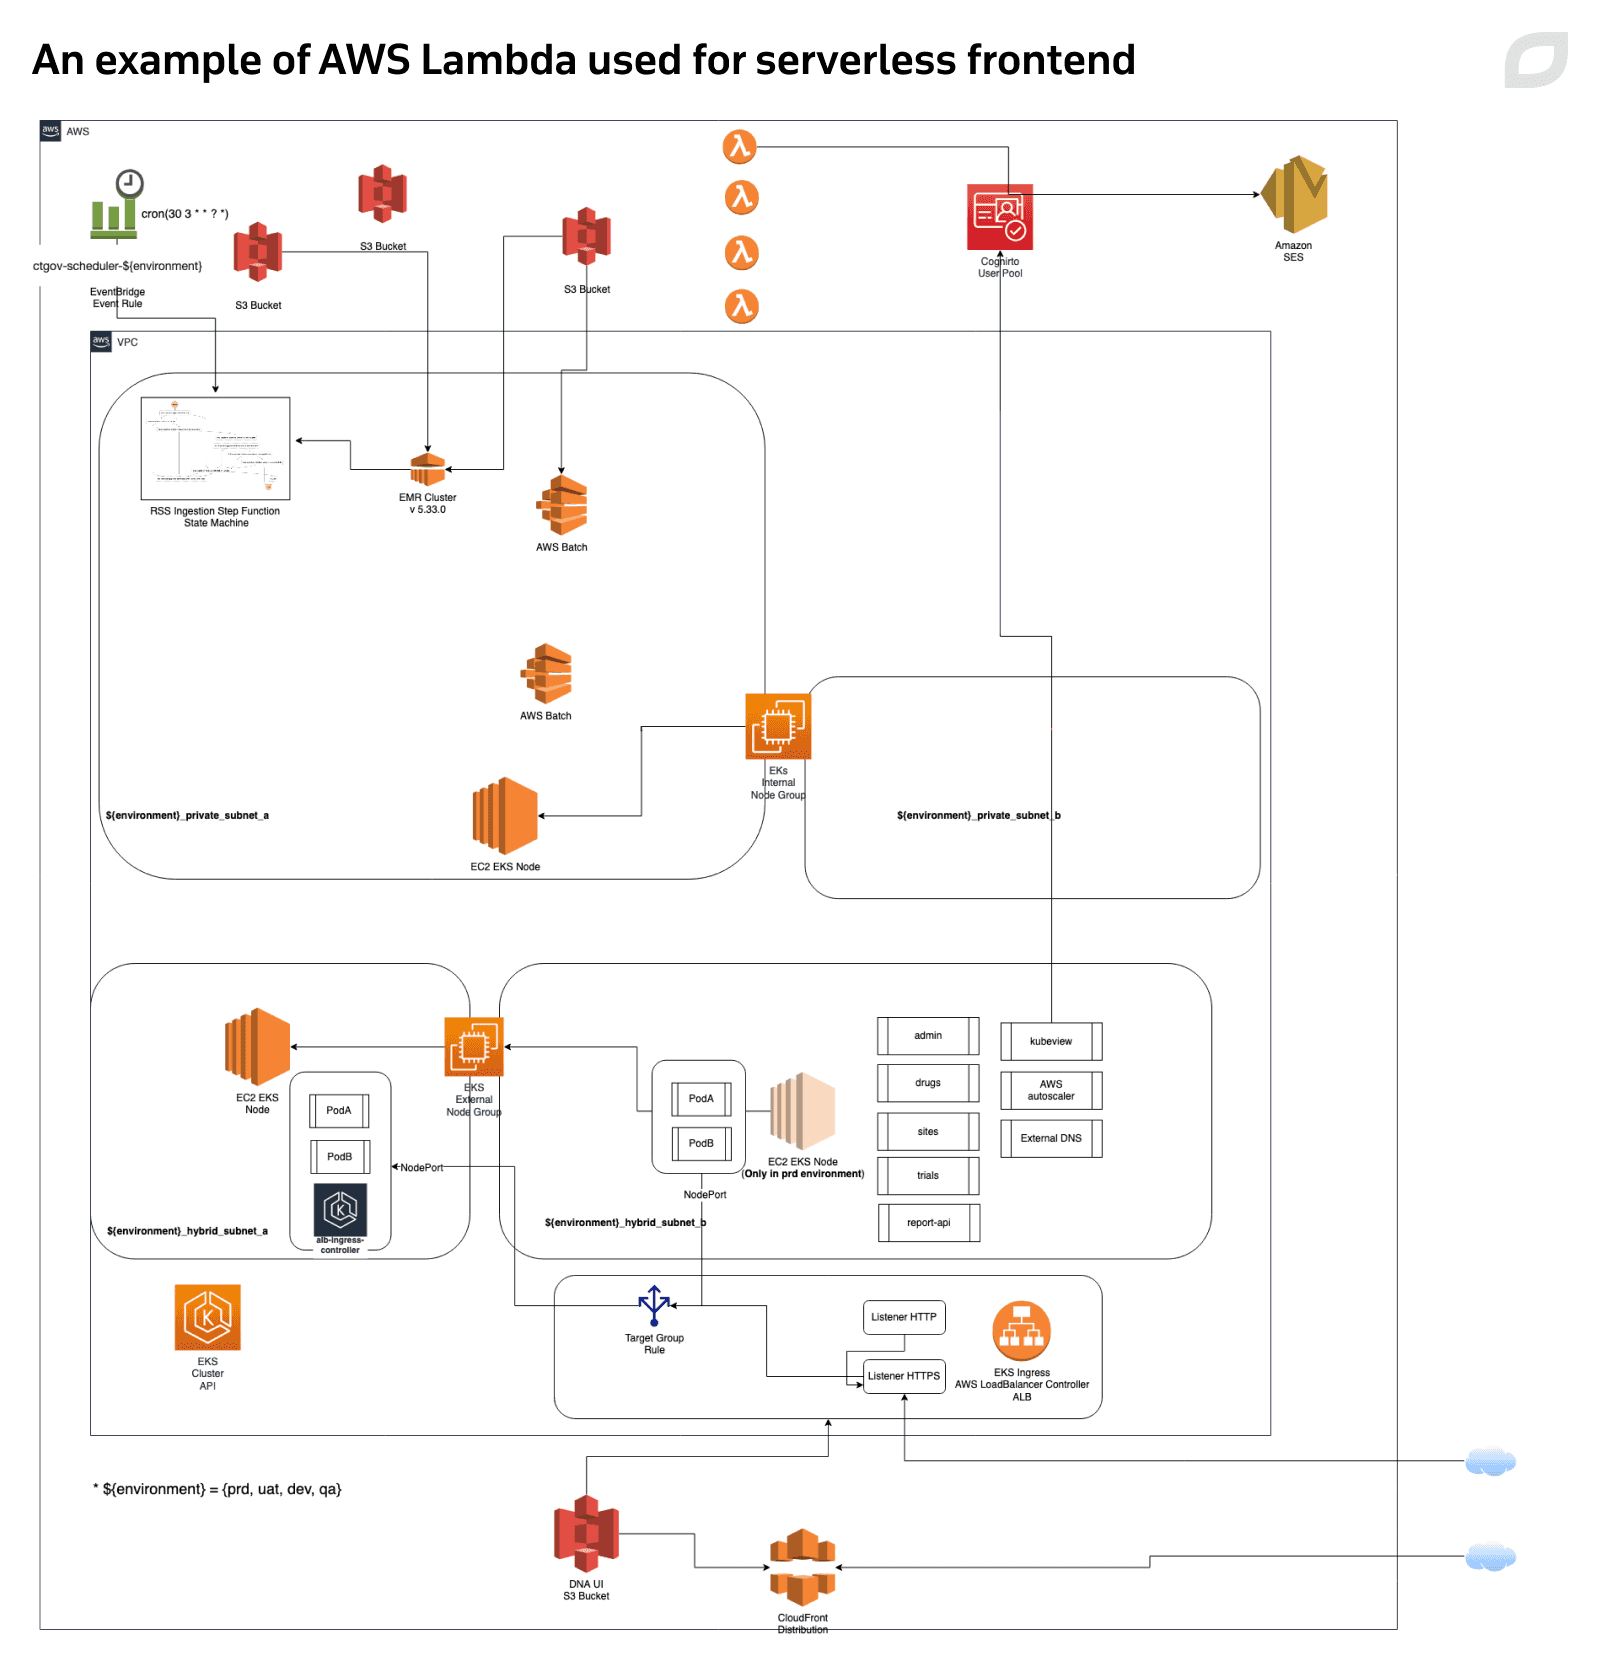 An example of AWS Lambda used for serverless frontend